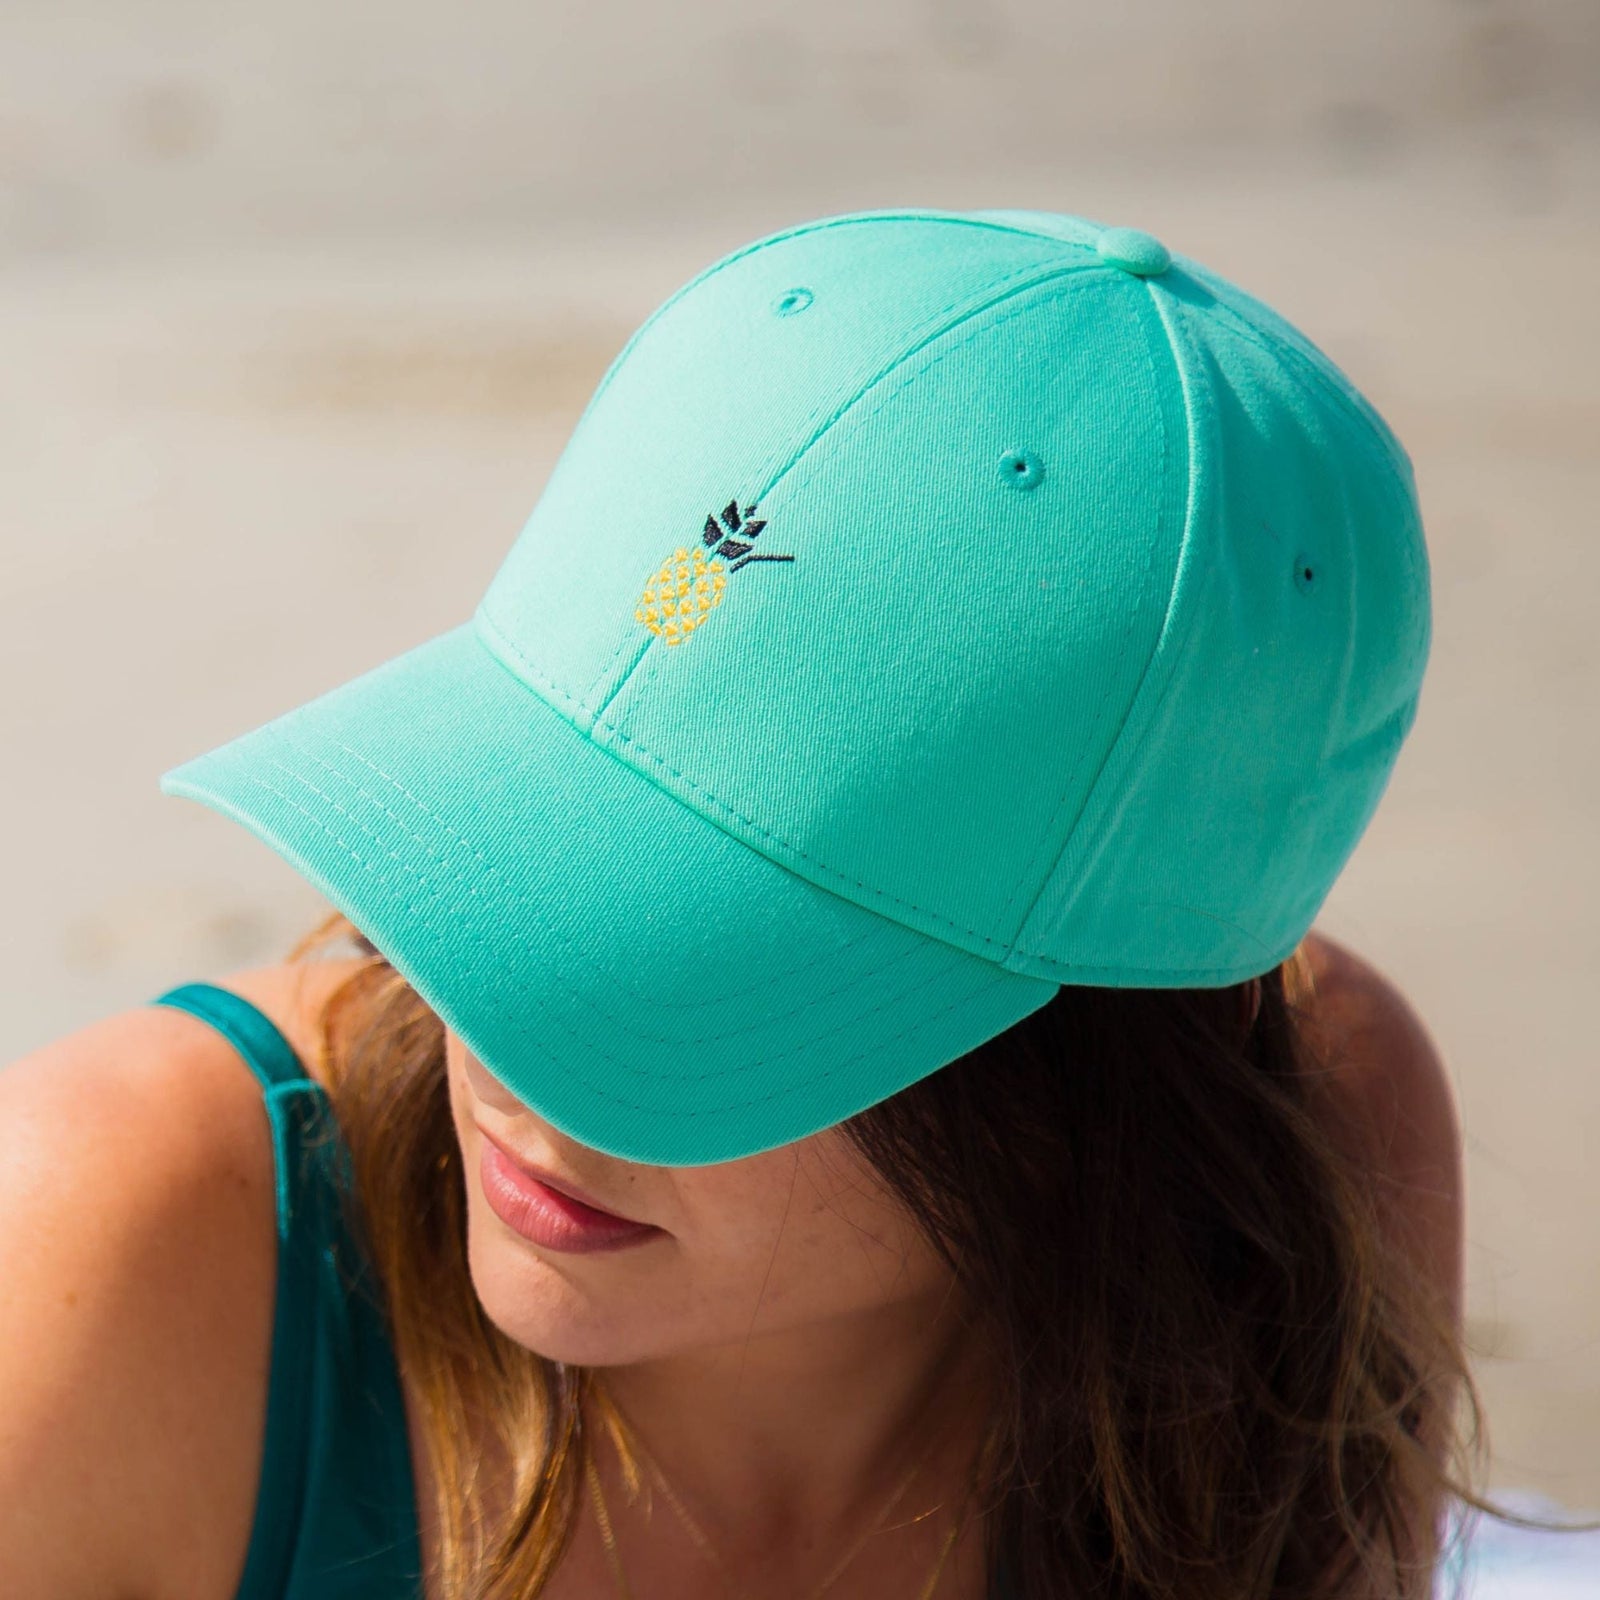 https://cdn.shopify.com/s/files/1/1223/9006/products/cheers-beaches-accessories-universal-seafoam-cheers-beaches-embroidered-pineapple-hat-seafoam-30977892483151_1600x.jpg?v=1658776554